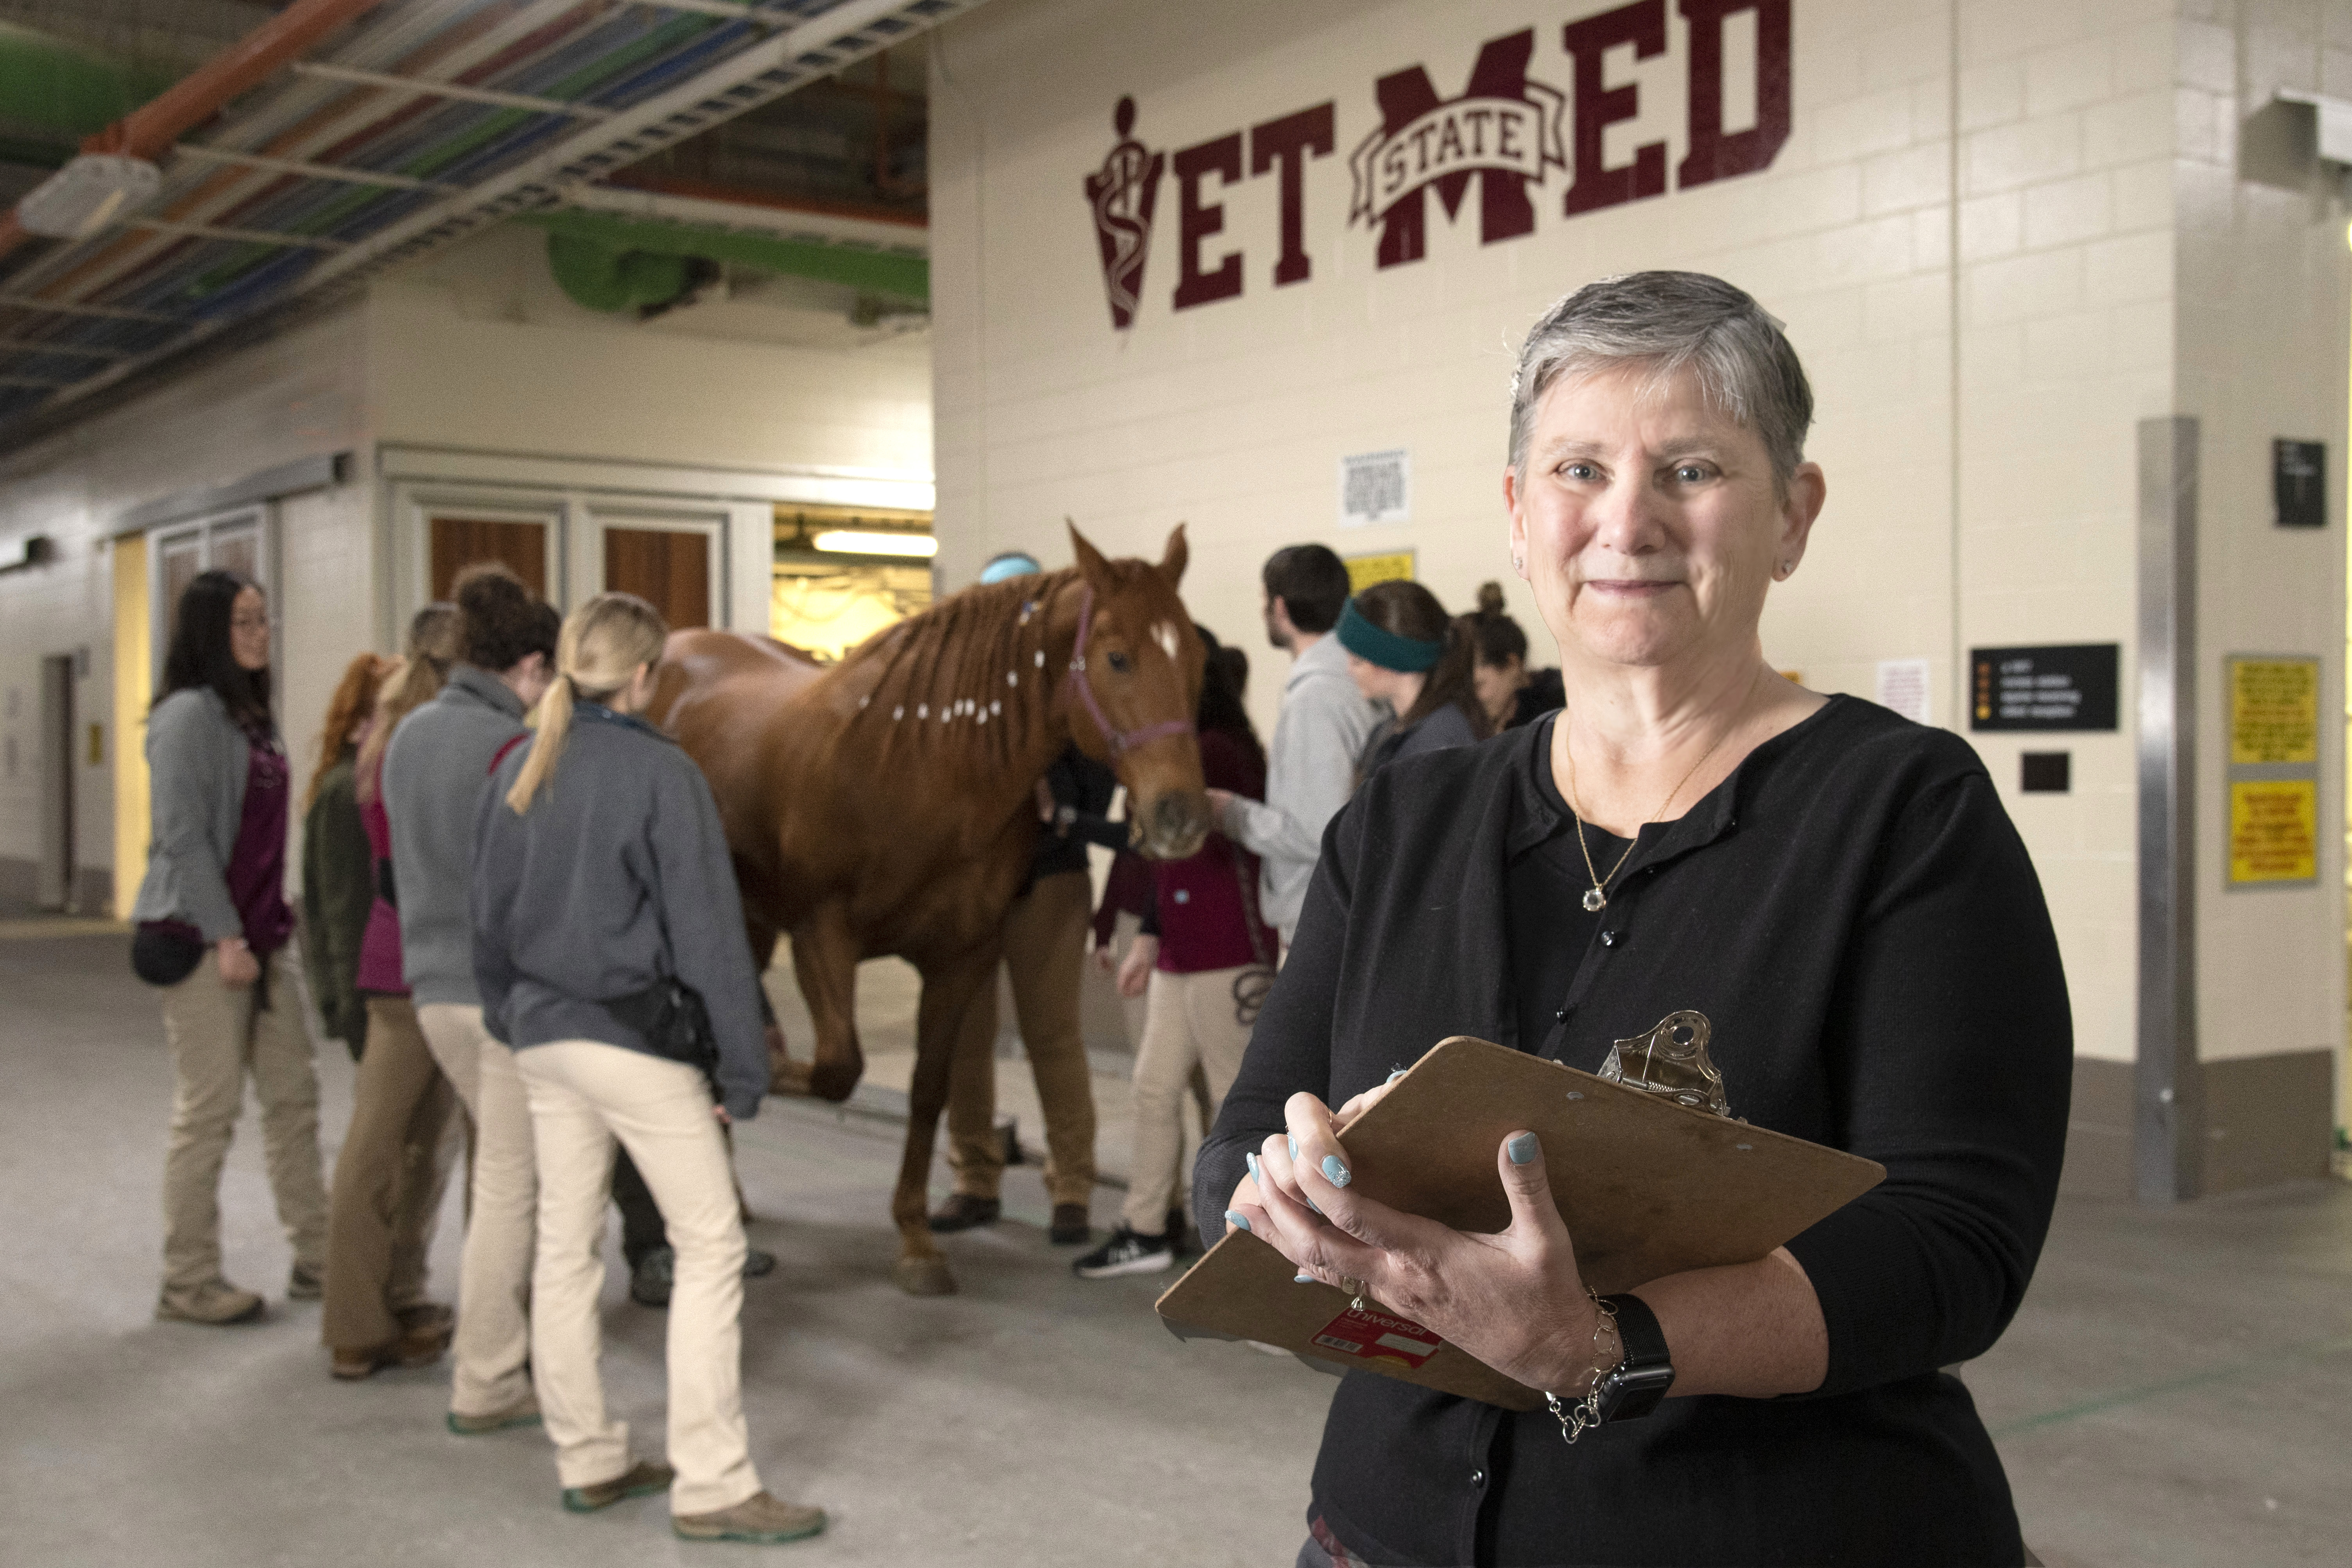 A woman poses with a clipboard in front of a horse and several students